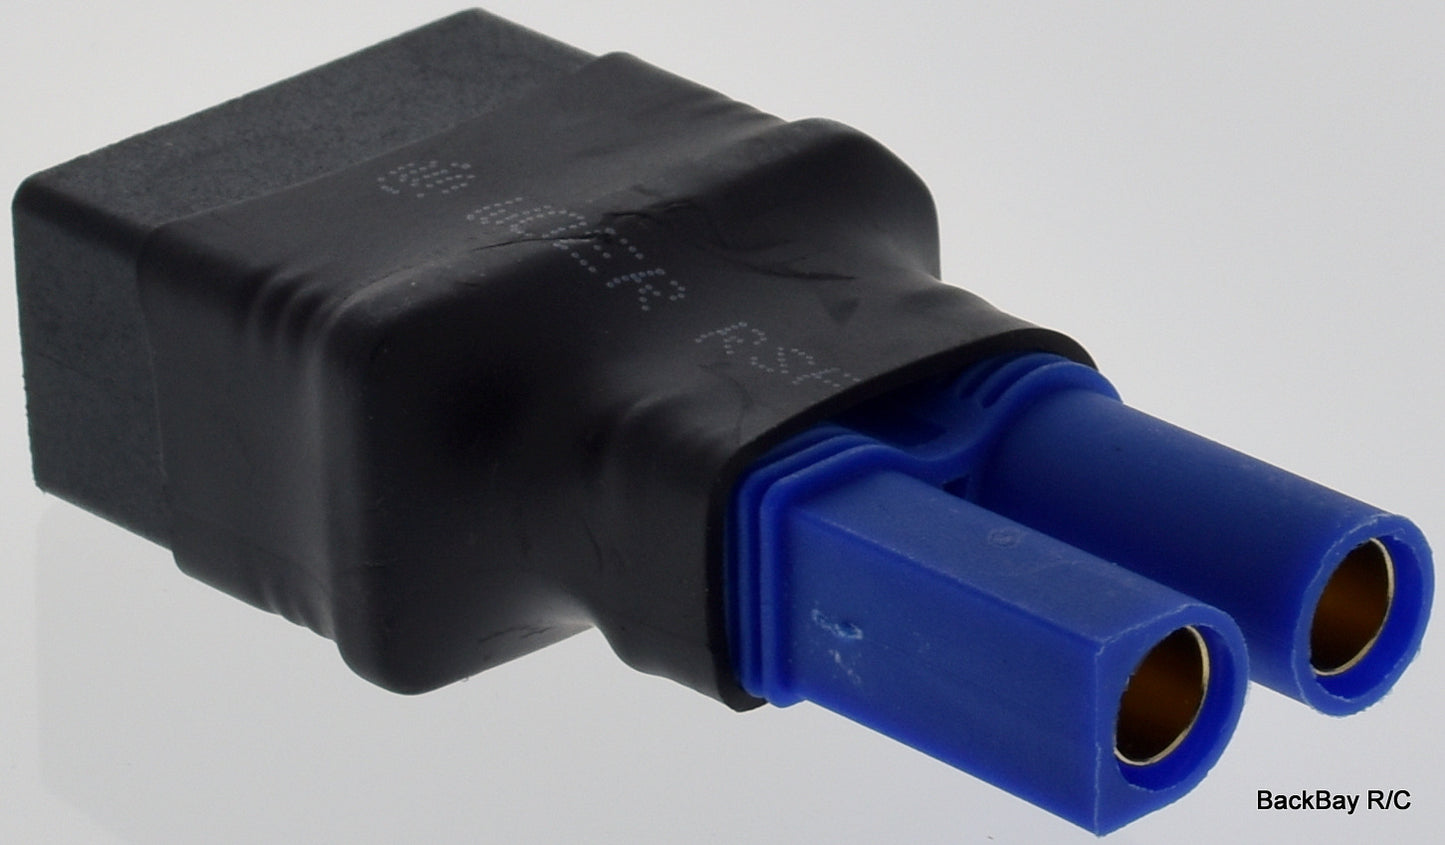 QS8-S Male to Female EC5 Adapter - No Wires Adapter